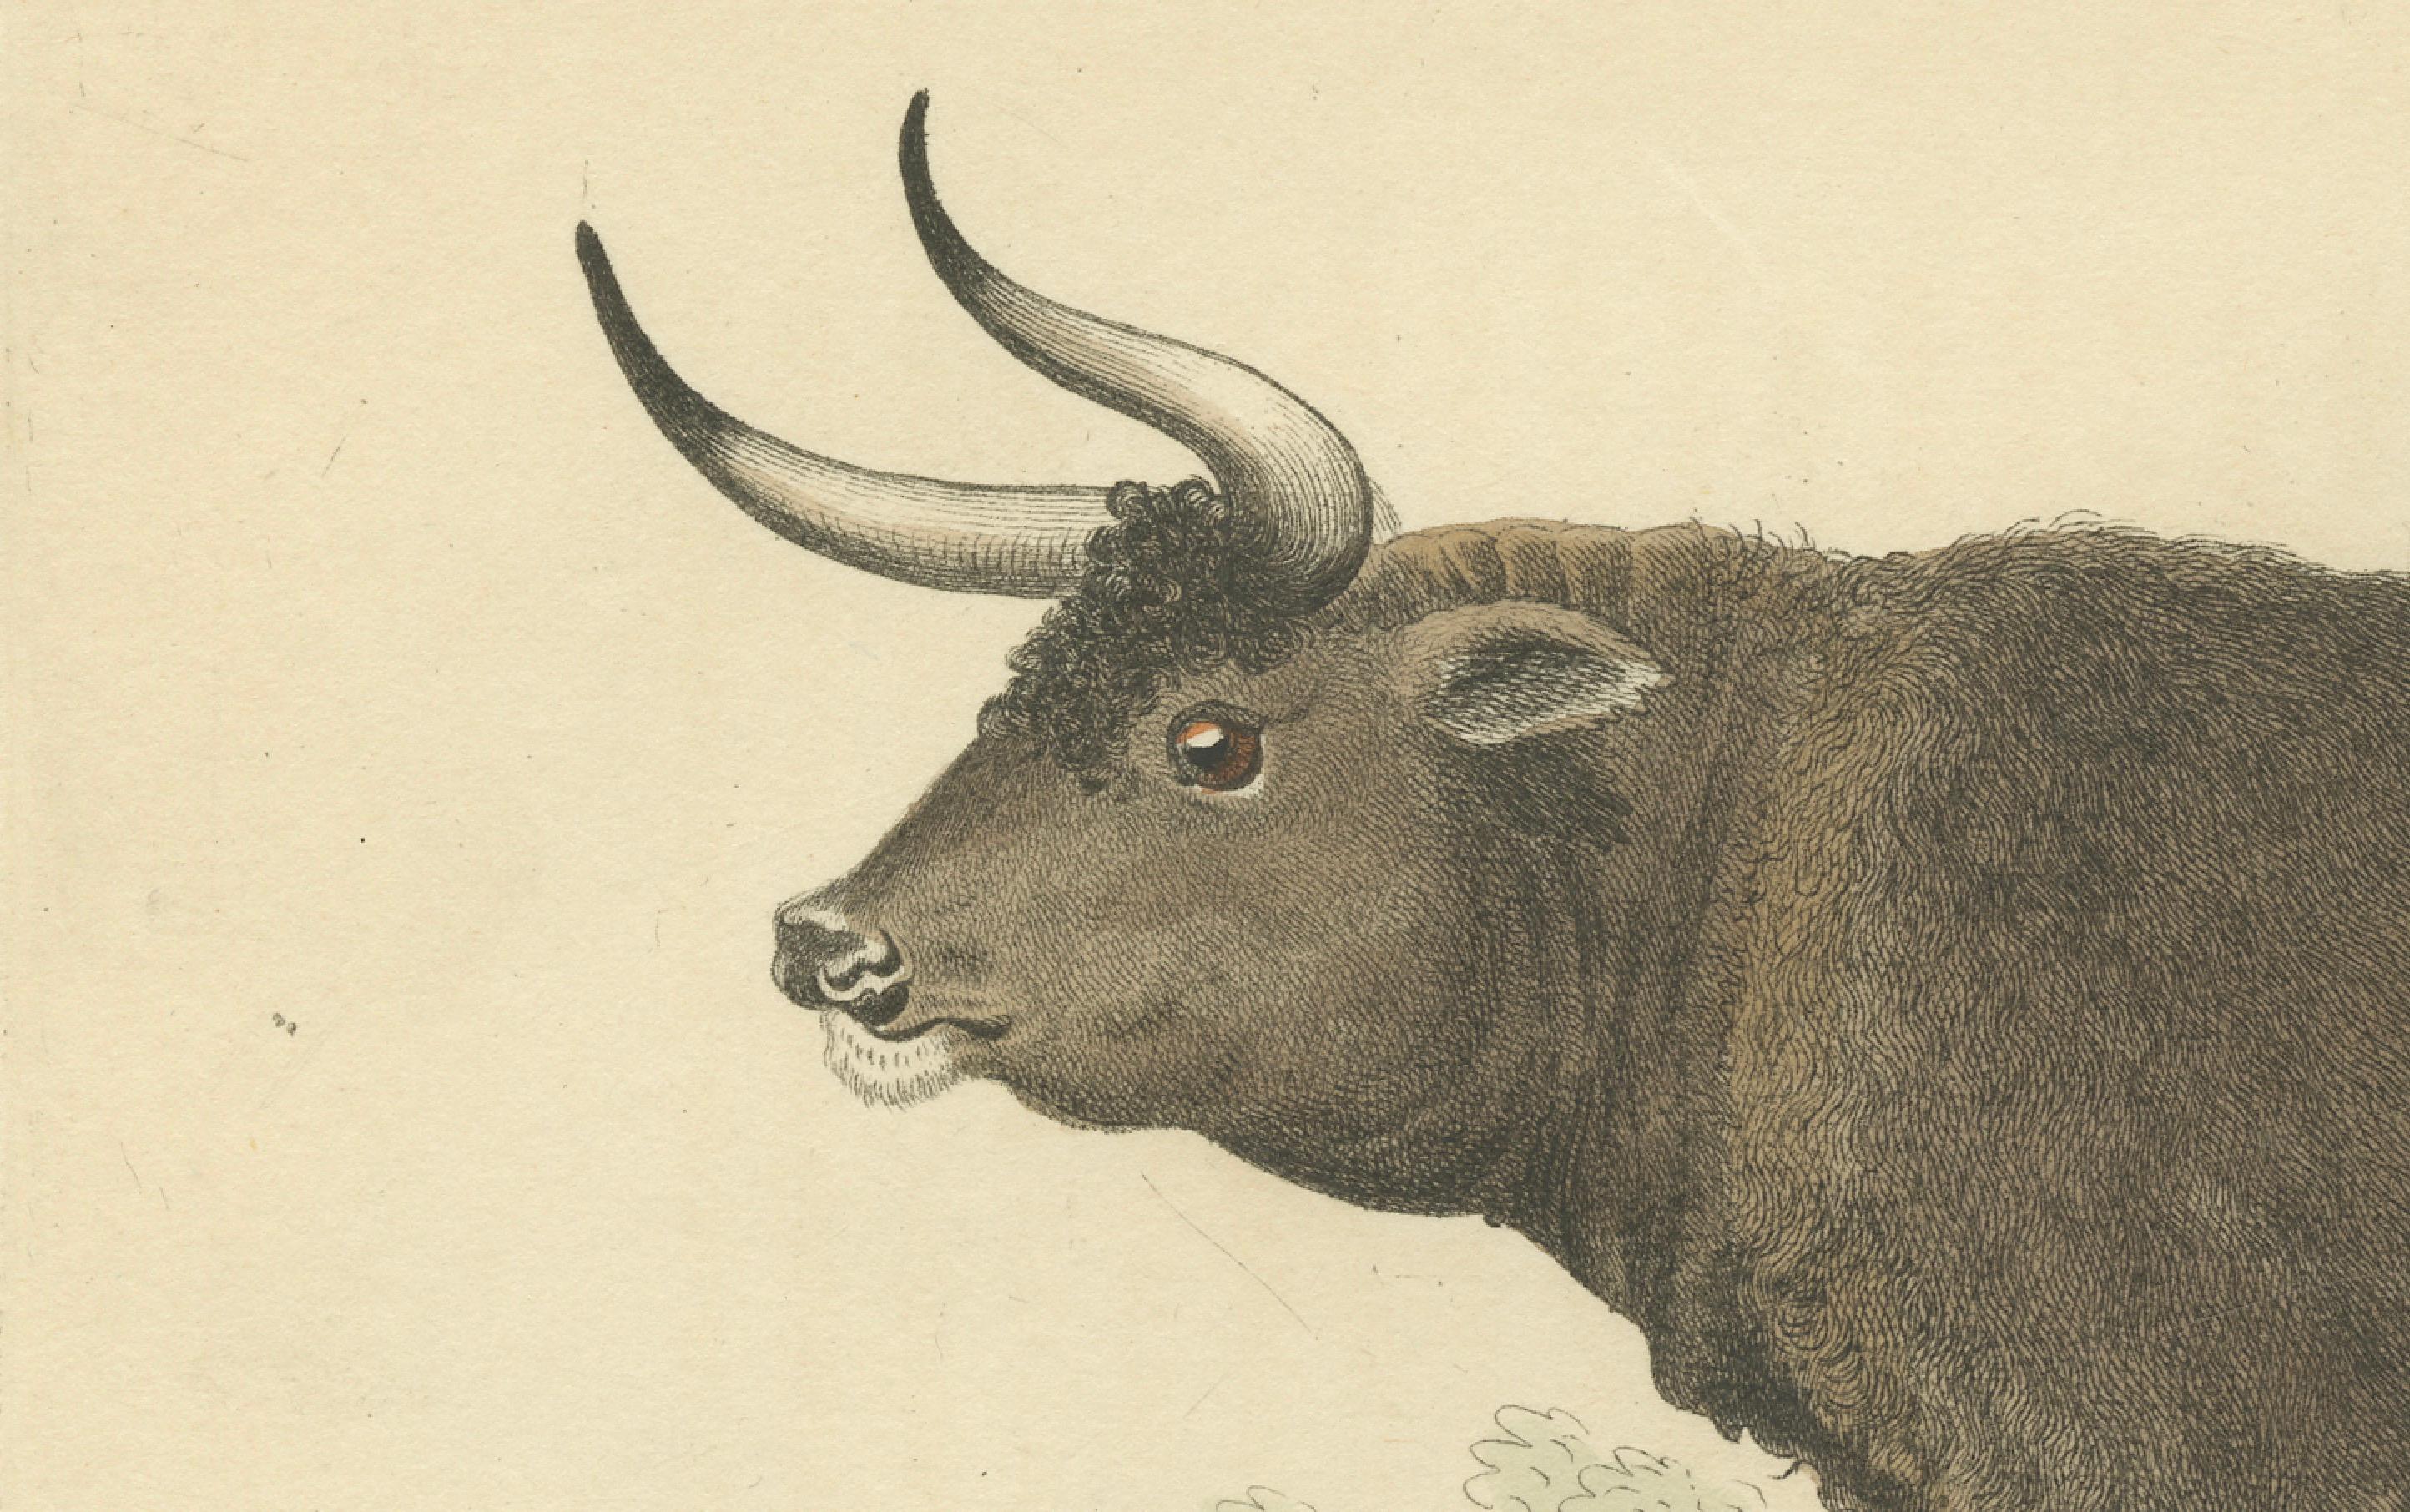 The image is an original historical print of a wild ox, titled 'The Wild Ox, Bos Urus', with hand coloring. The print was published by G.B. Whittaker based on an illustration by Charles Hamilton Smith around 1826. The animal depicted is known as the